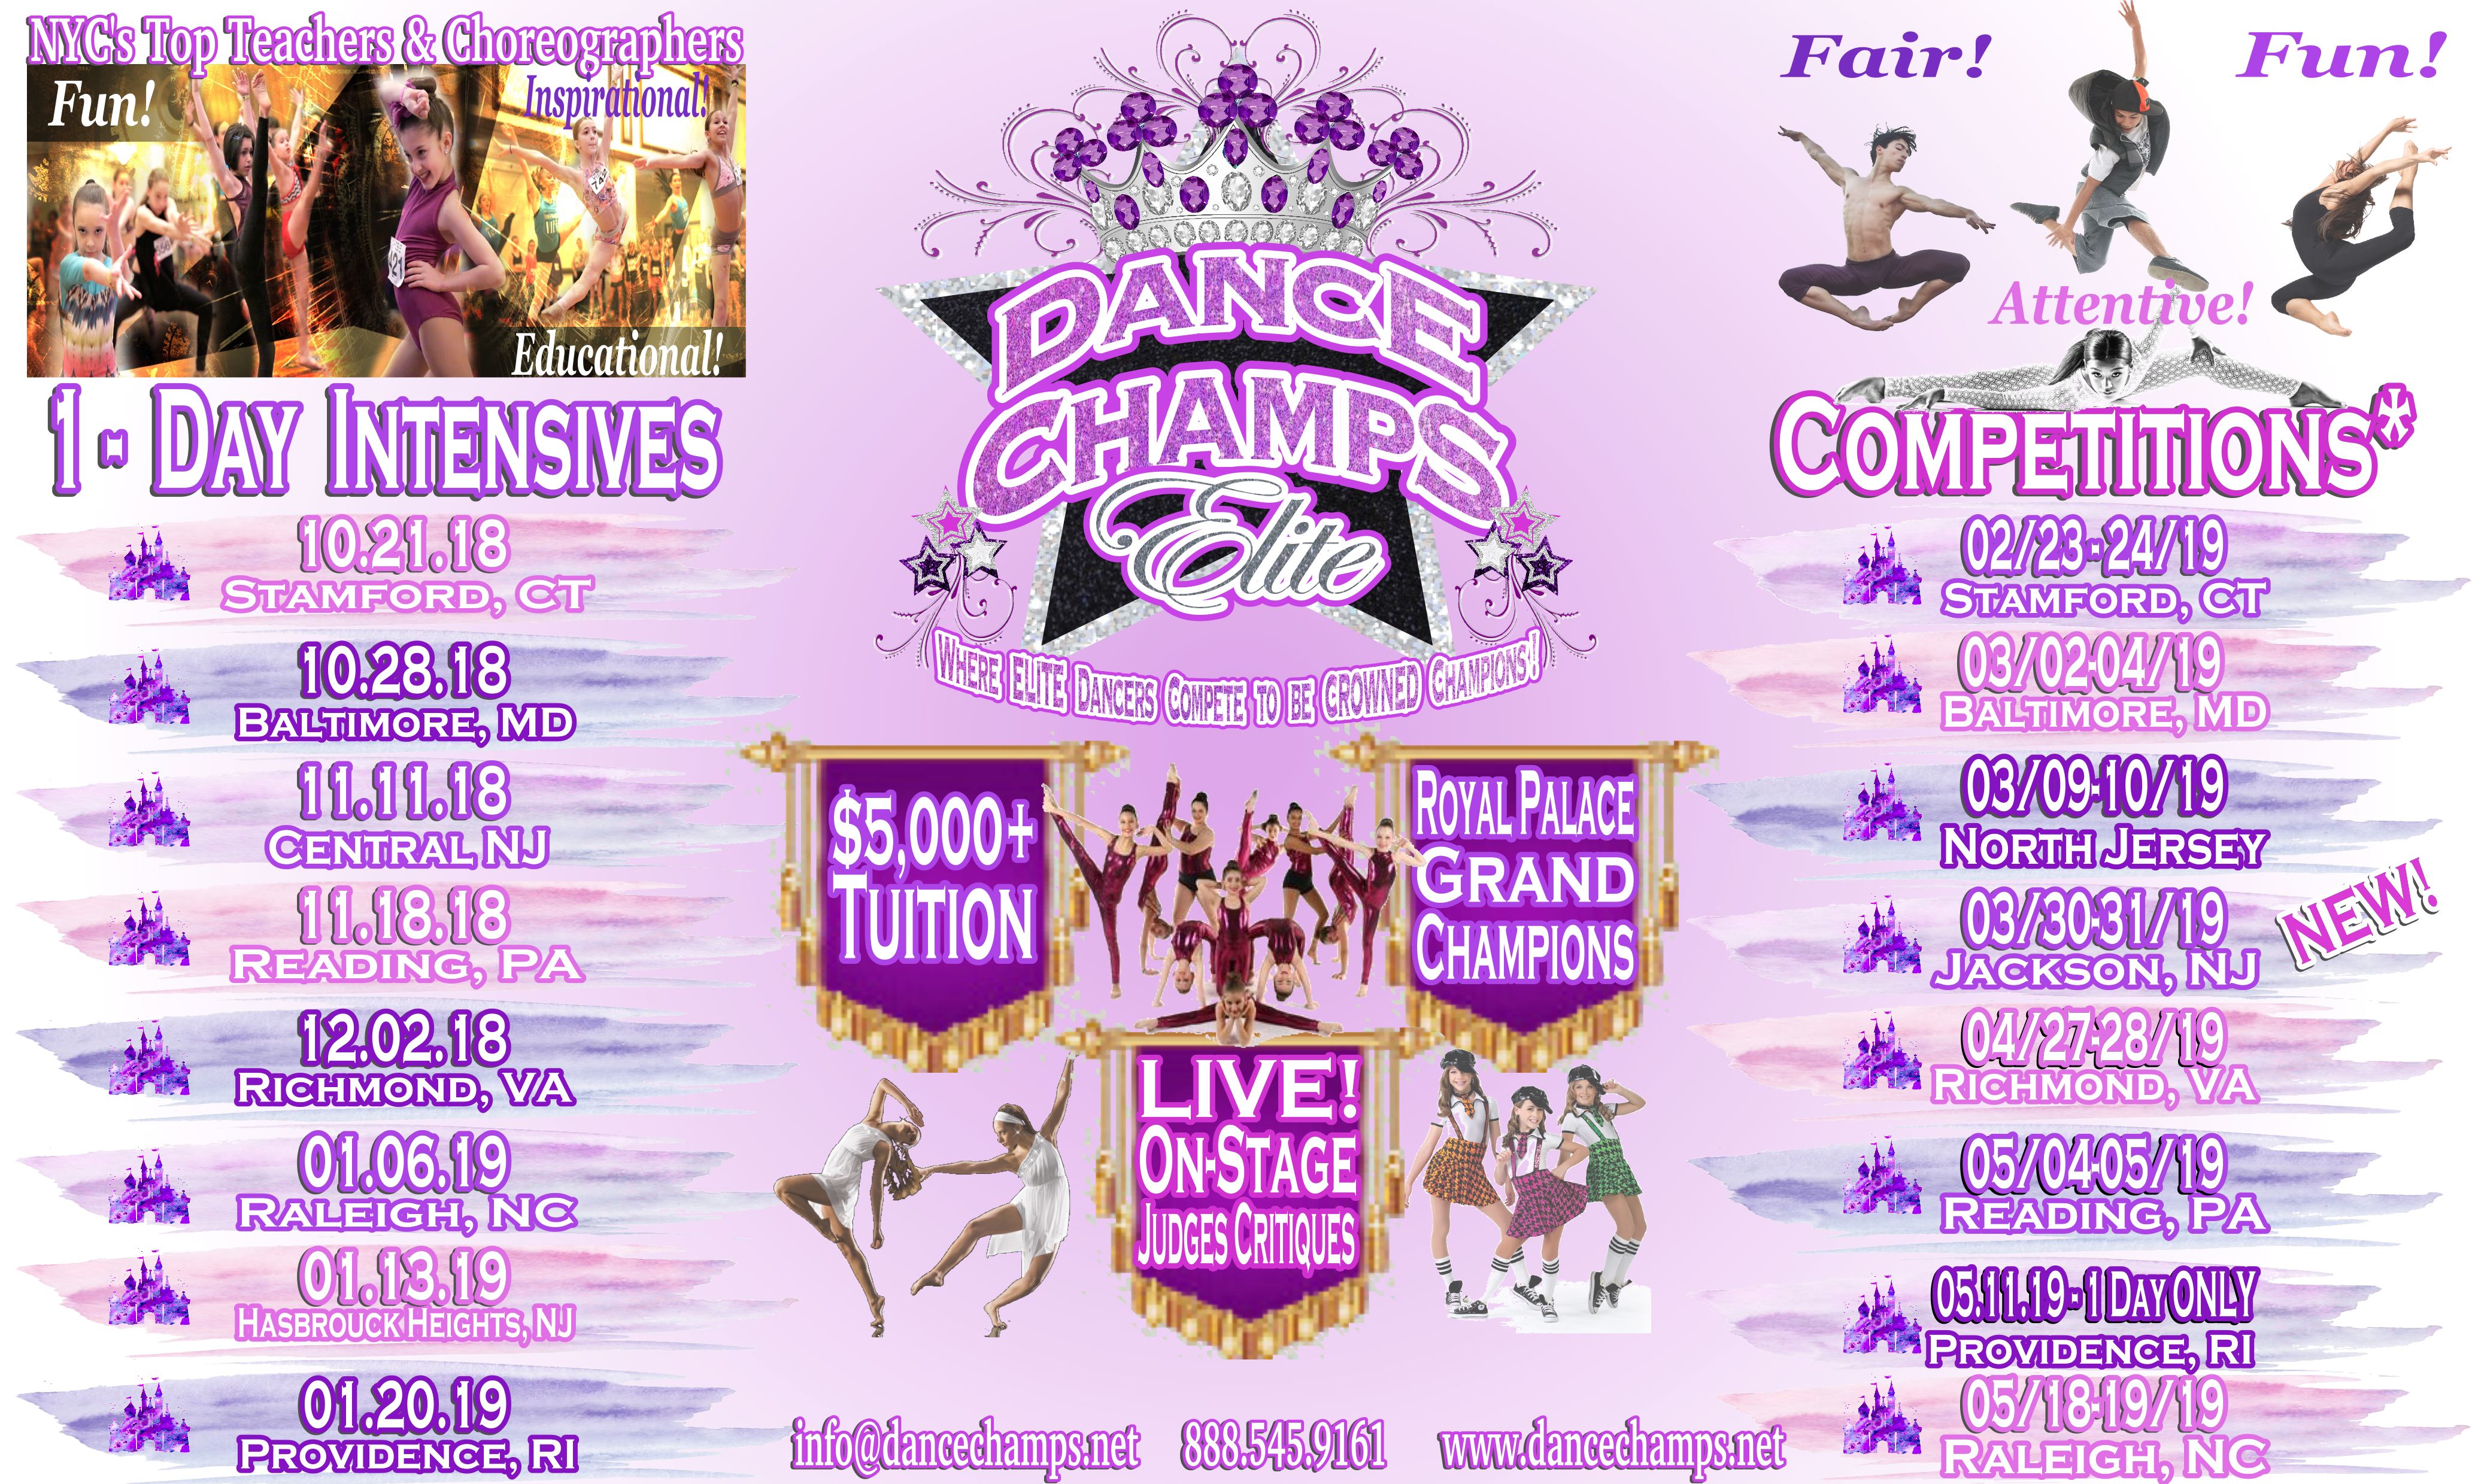 Dates Dance Champs Elite Dance Competitions LIVE! OnStage Judges Feedback